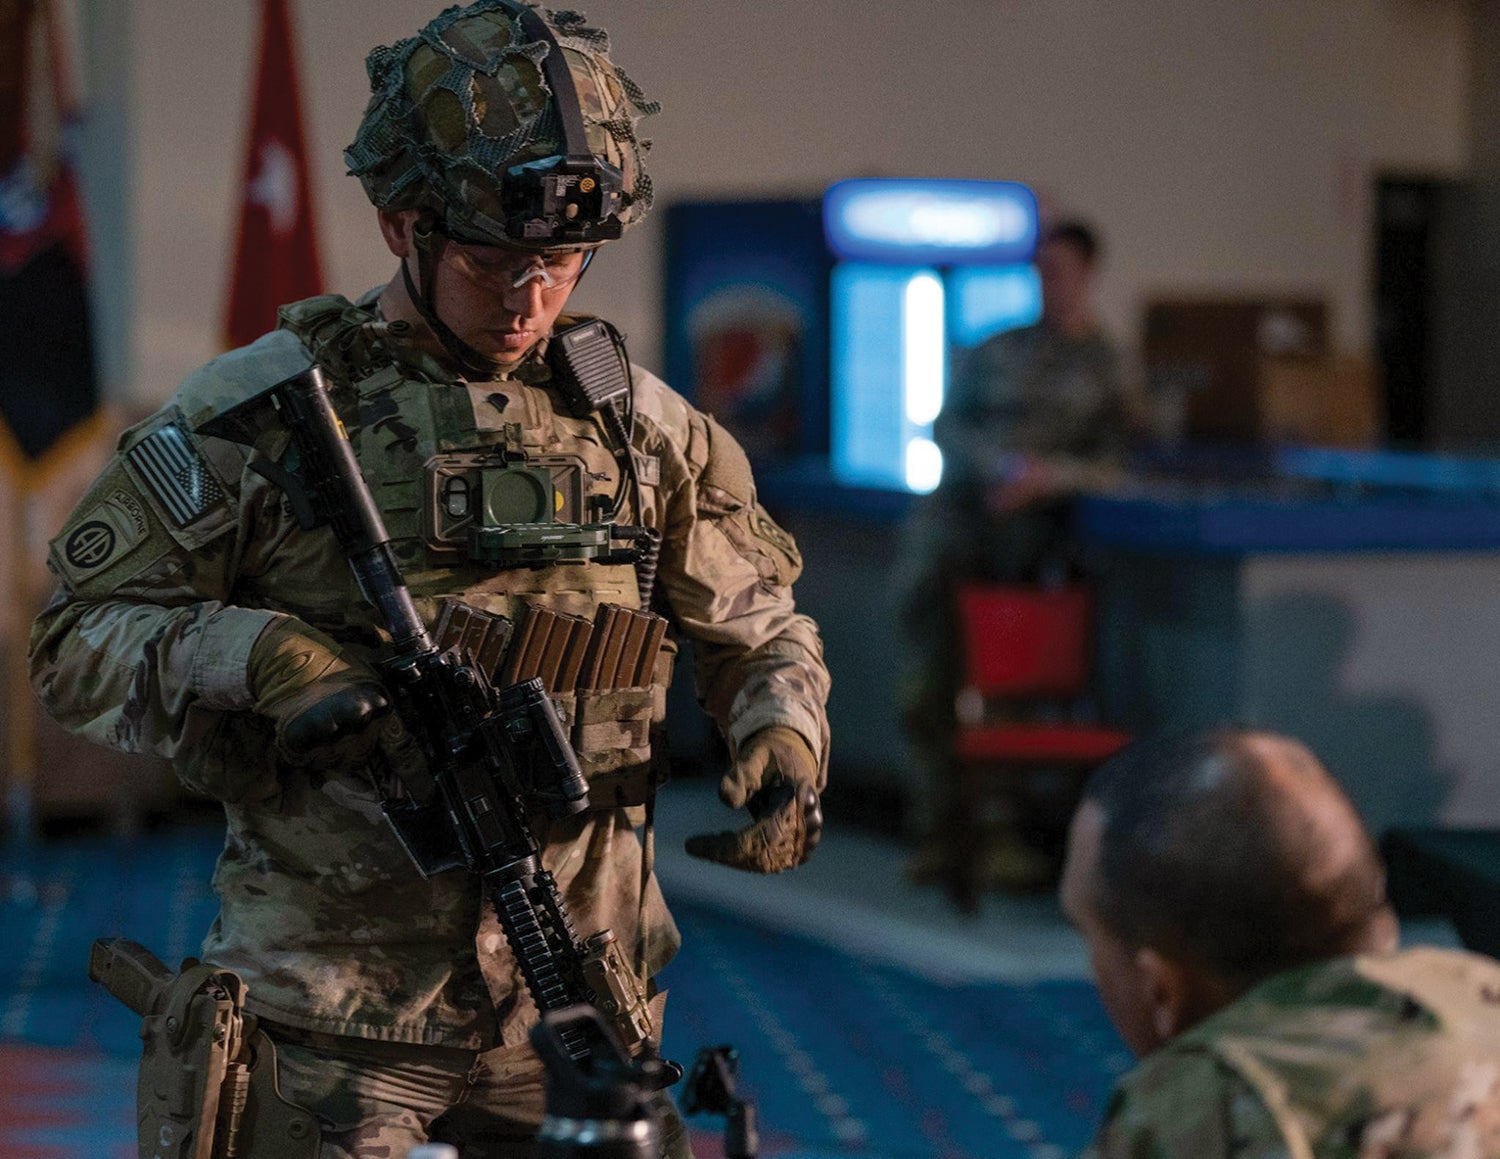 A paratrooper from the 82nd Airborne Division demonstrates a flip-down keypad display unit during the division’s first Innovation Drop Zone Competition at Fort Bragg, now Fort Liberty, North Carolina. (Credit: U.S. Army/ Sgt. Robert Whitlow)